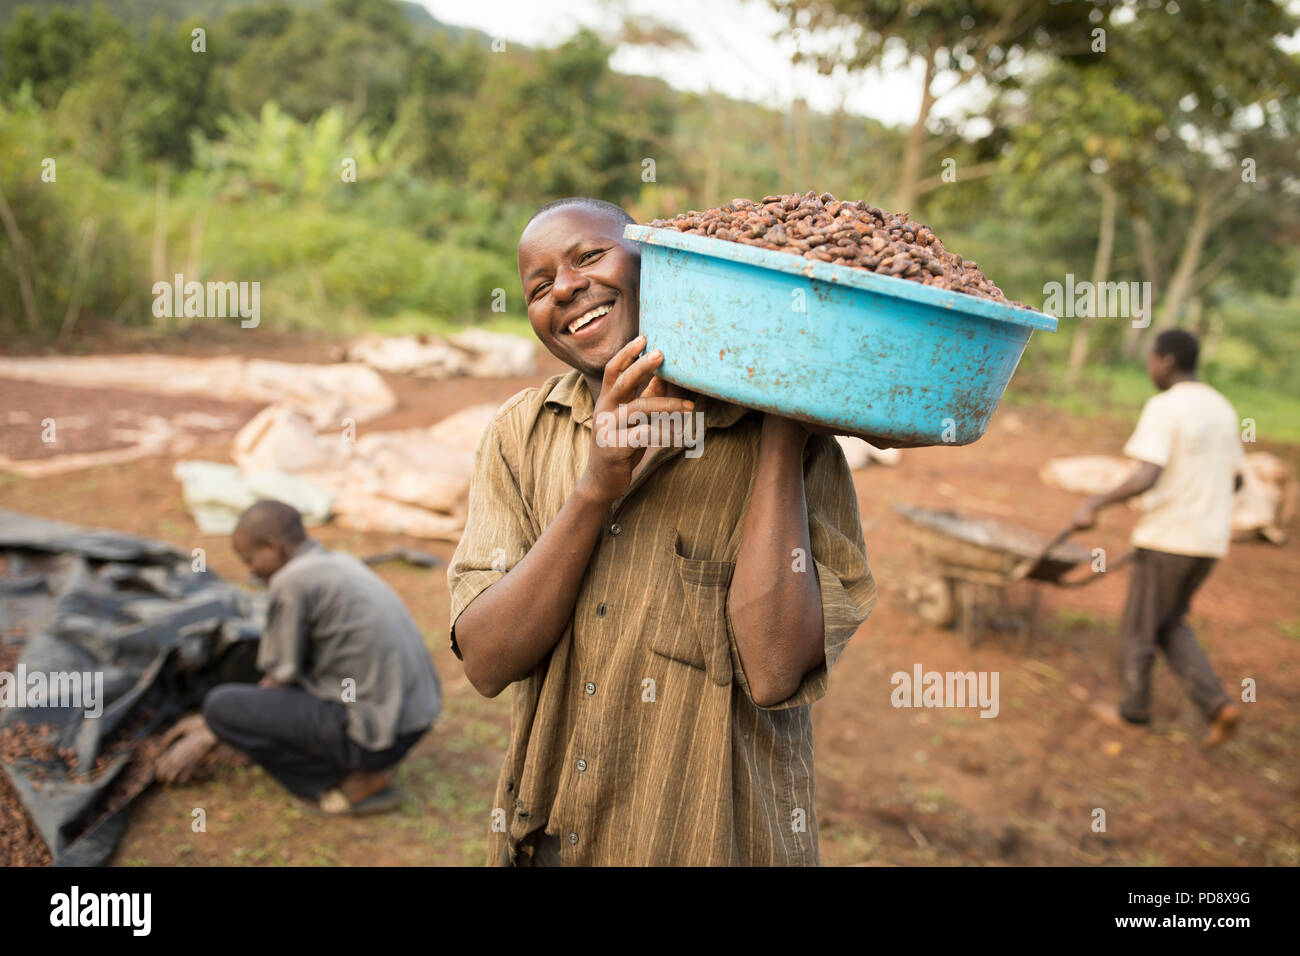 A worker helps to processes fermented cocoa beans at a chocolate production facility in Mukono District, Uganda. Stock Photo